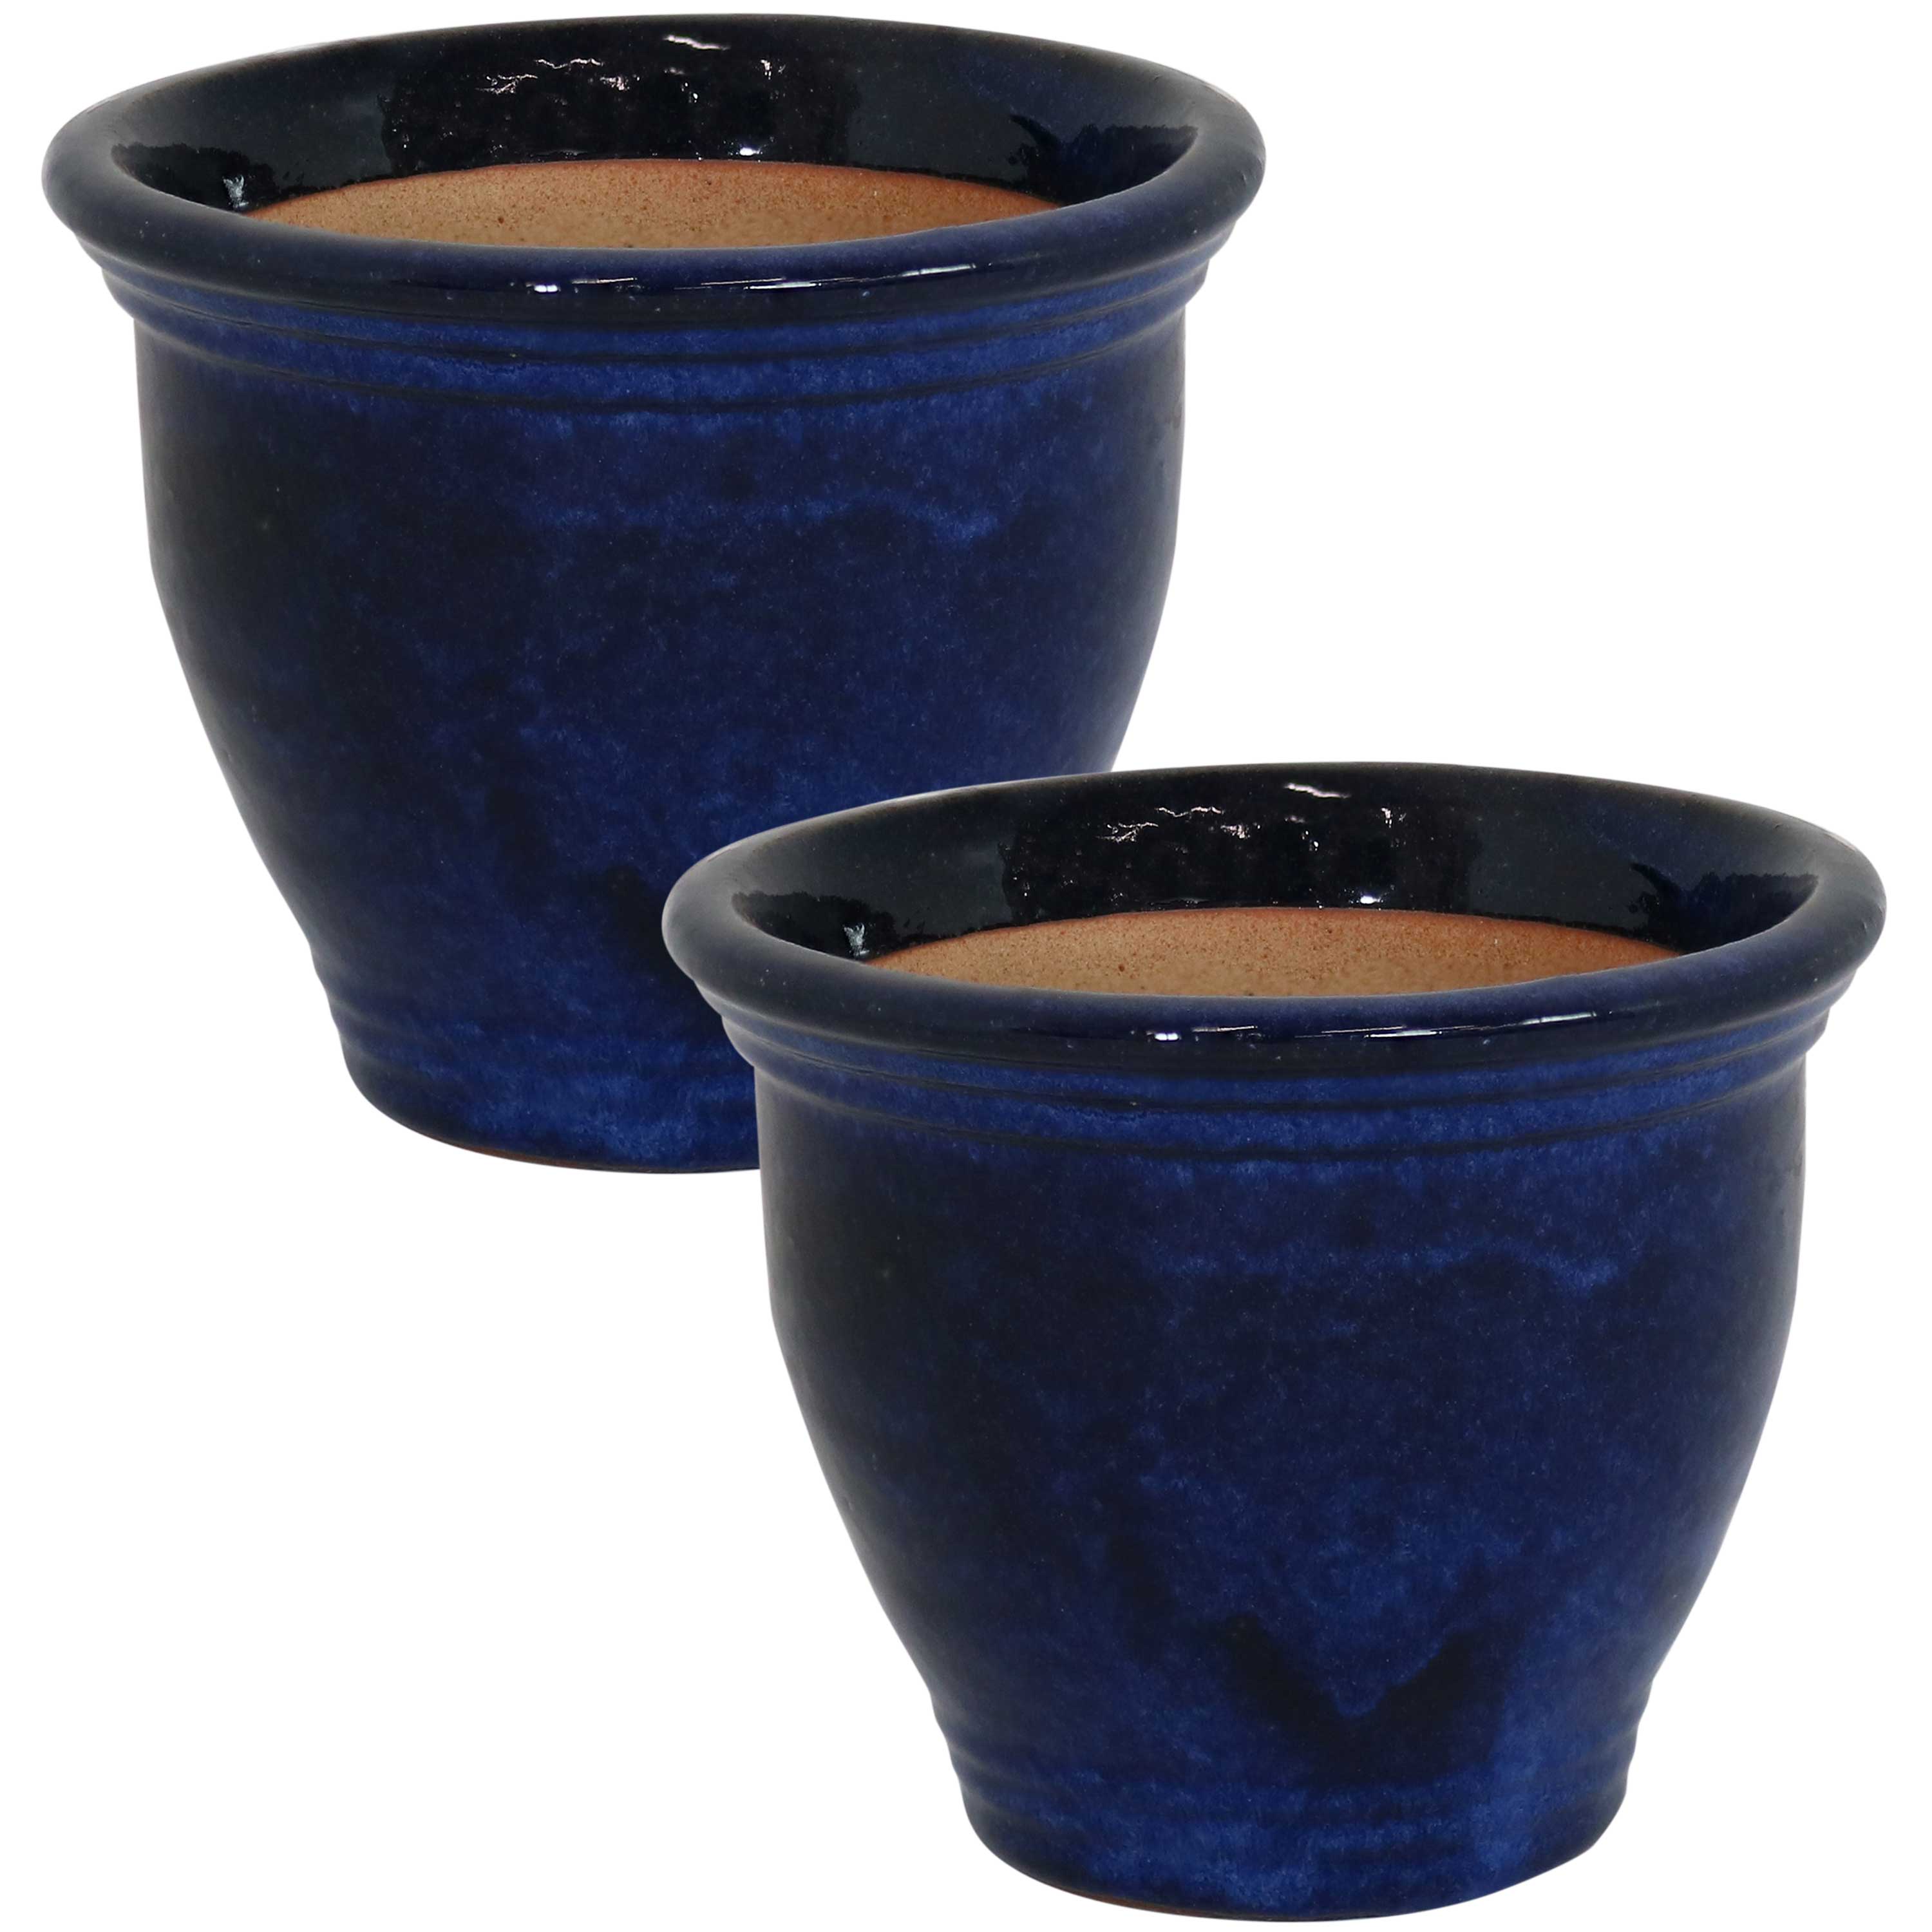 Outdoor/Indoor Use High-Fired Glazed UV and Frost-Resistant Finish 9-Inch Imperial Blue Set of 2 Sunnydaze Ceramic Flower Pot Planter Saucer 